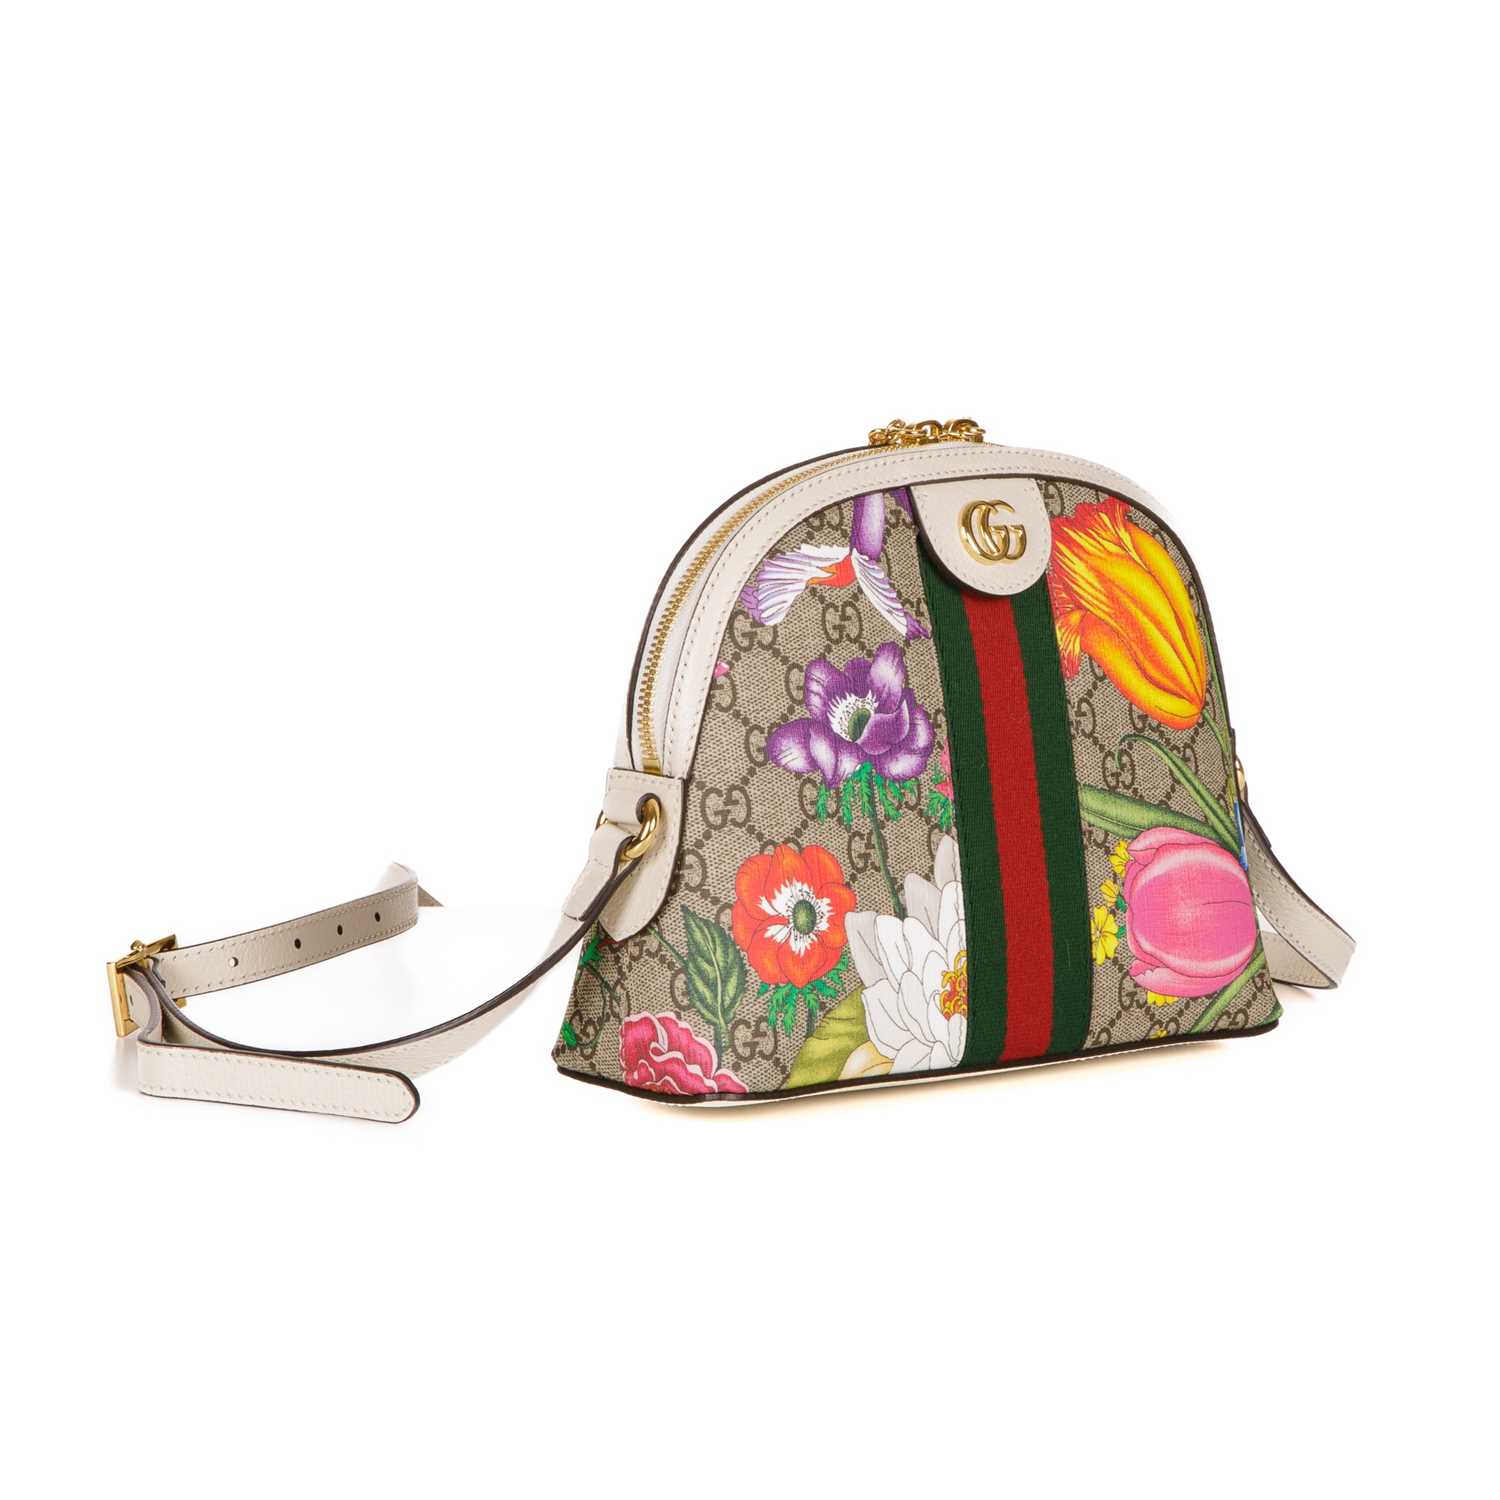 Gucci, a Supreme Floral Web Ophidia handbag, crafted from beige GG coated canvas, overlayed with - Bild 3 aus 4